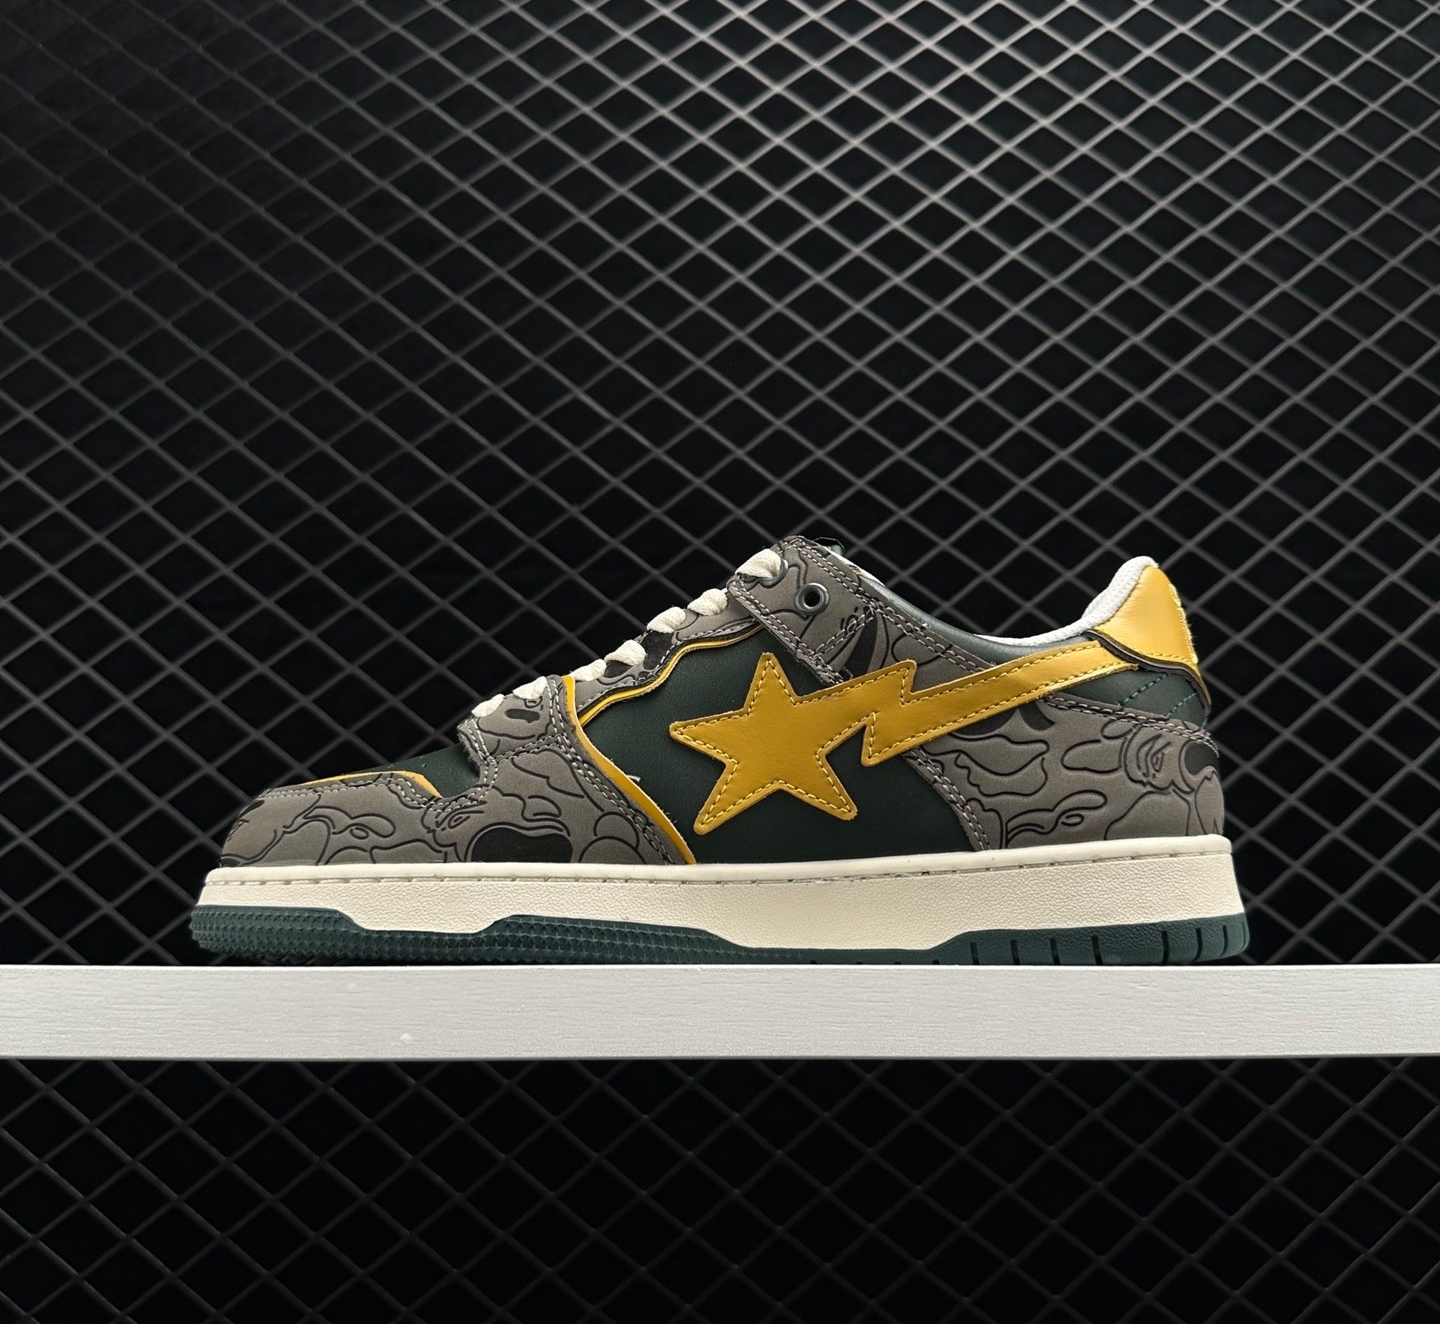 A Bathing Ape Bape SK8 Sta Grey Mustard Yellow - Fashionable and Stylish Sneakers